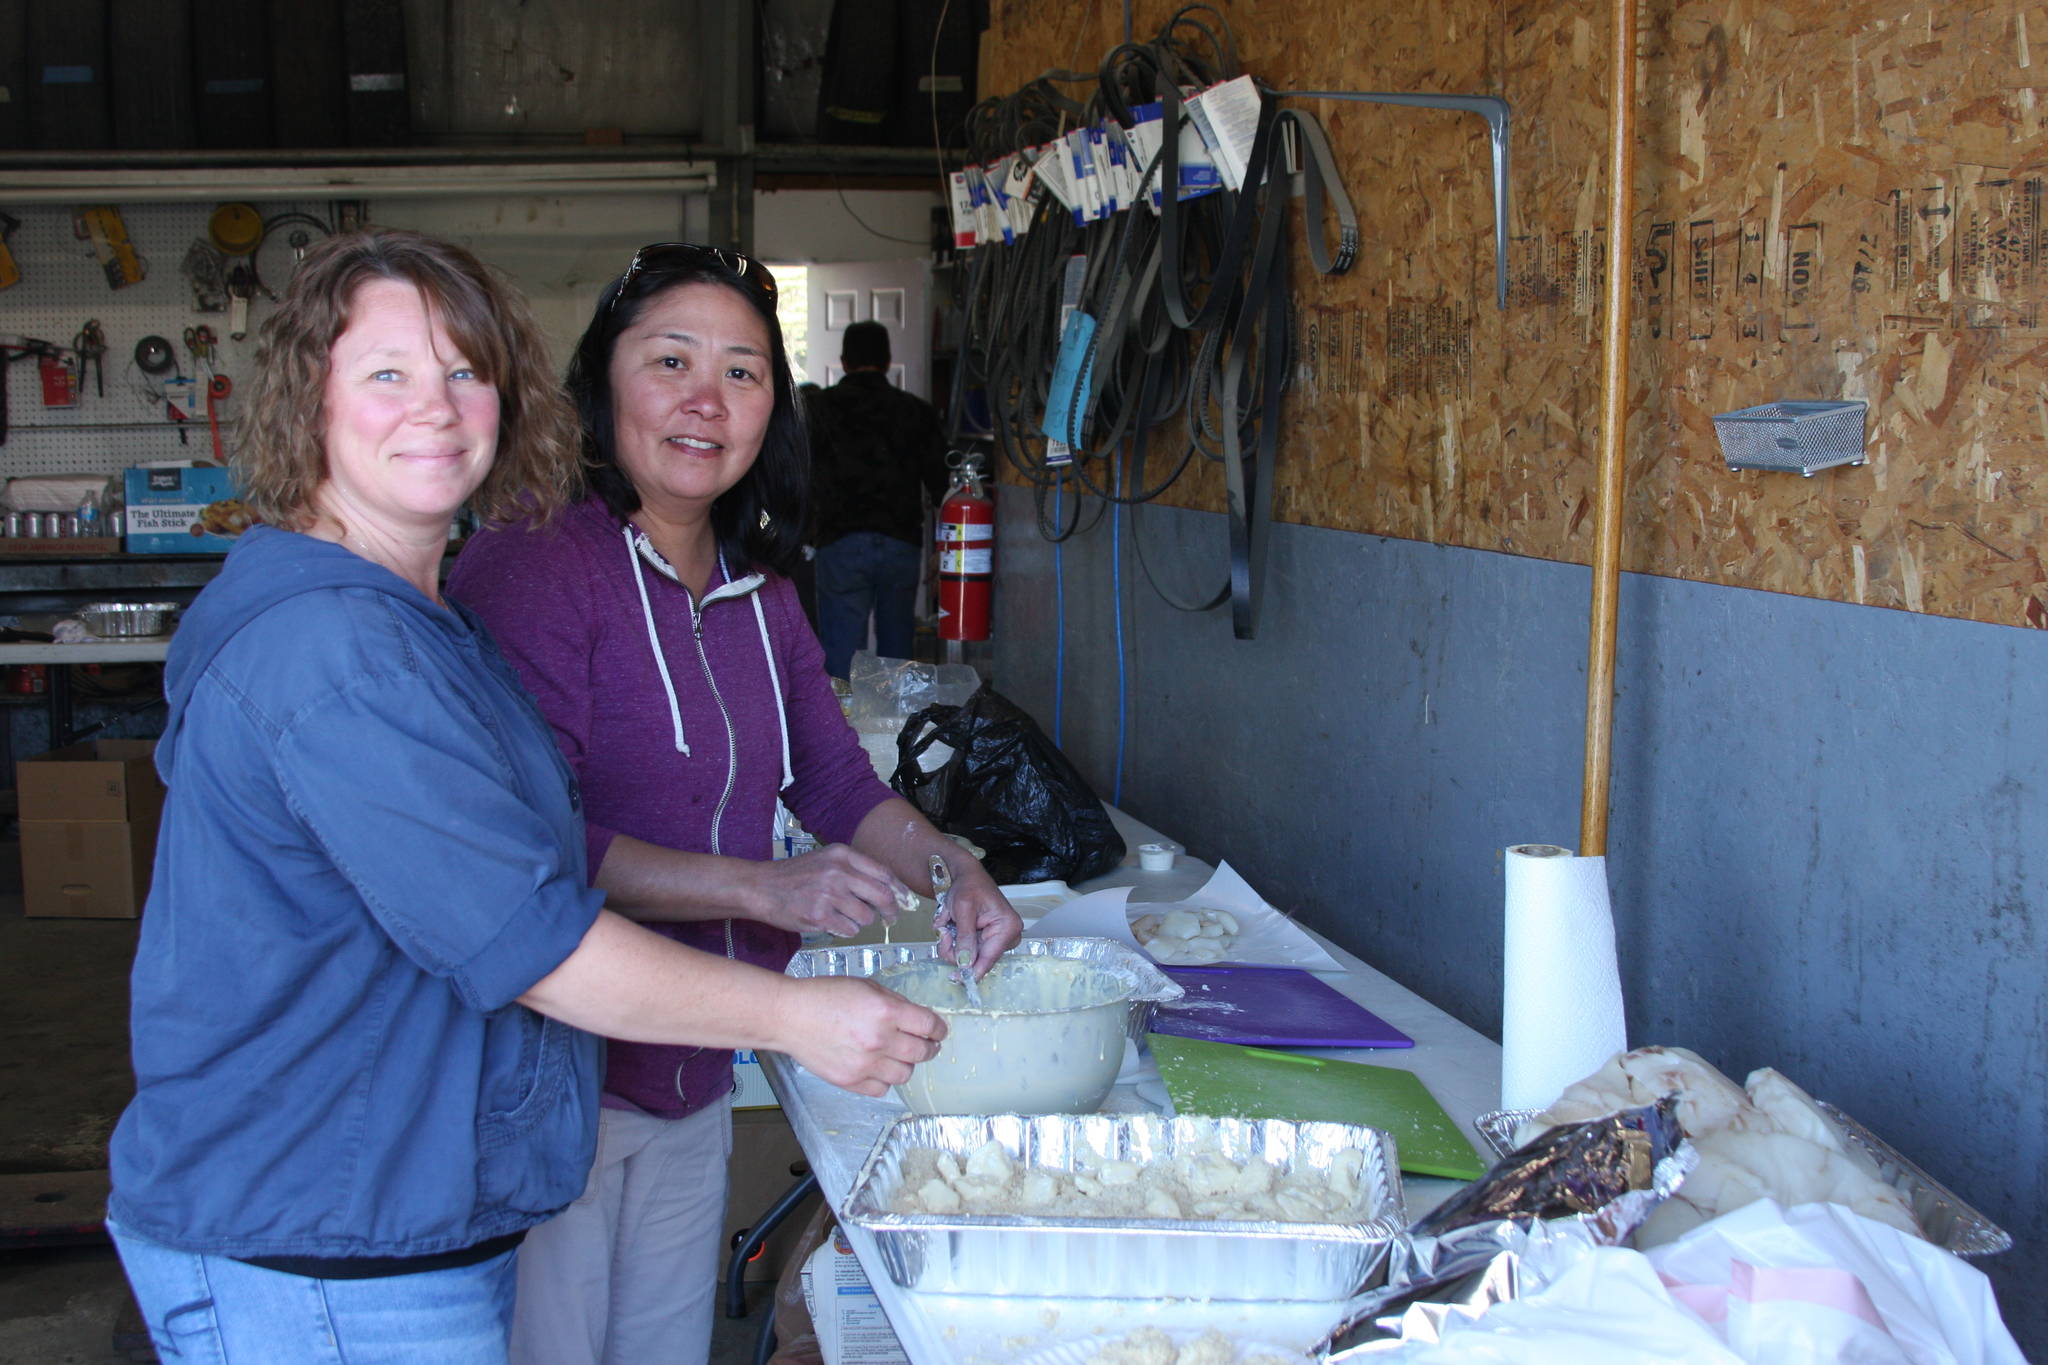 (From left to right) Brandi Blauvelt, daughter of owners Elaine and Dale Griner, and Thurmond’s employee Janet George prepare fresh deep-fried halibut for those attending the fourth annual Thurmond’s Far West Auto Customer Appreciation Day on Saturday, June 9 in Anchor Point, Alaska. (Photo by Delcenia Cosman)